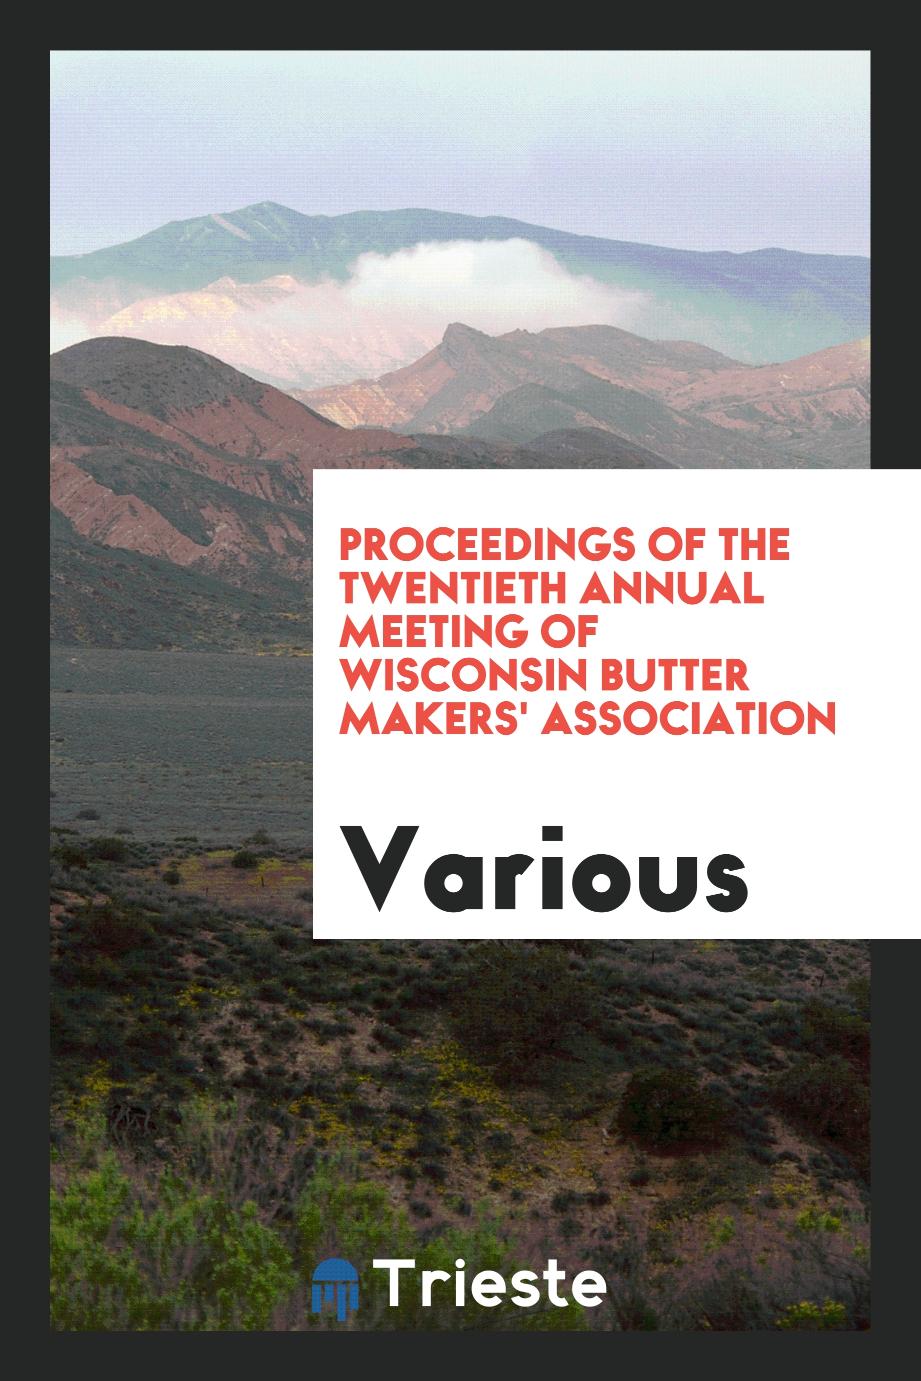 Proceedings of the Twentieth Annual Meeting of Wisconsin Butter Makers' Association